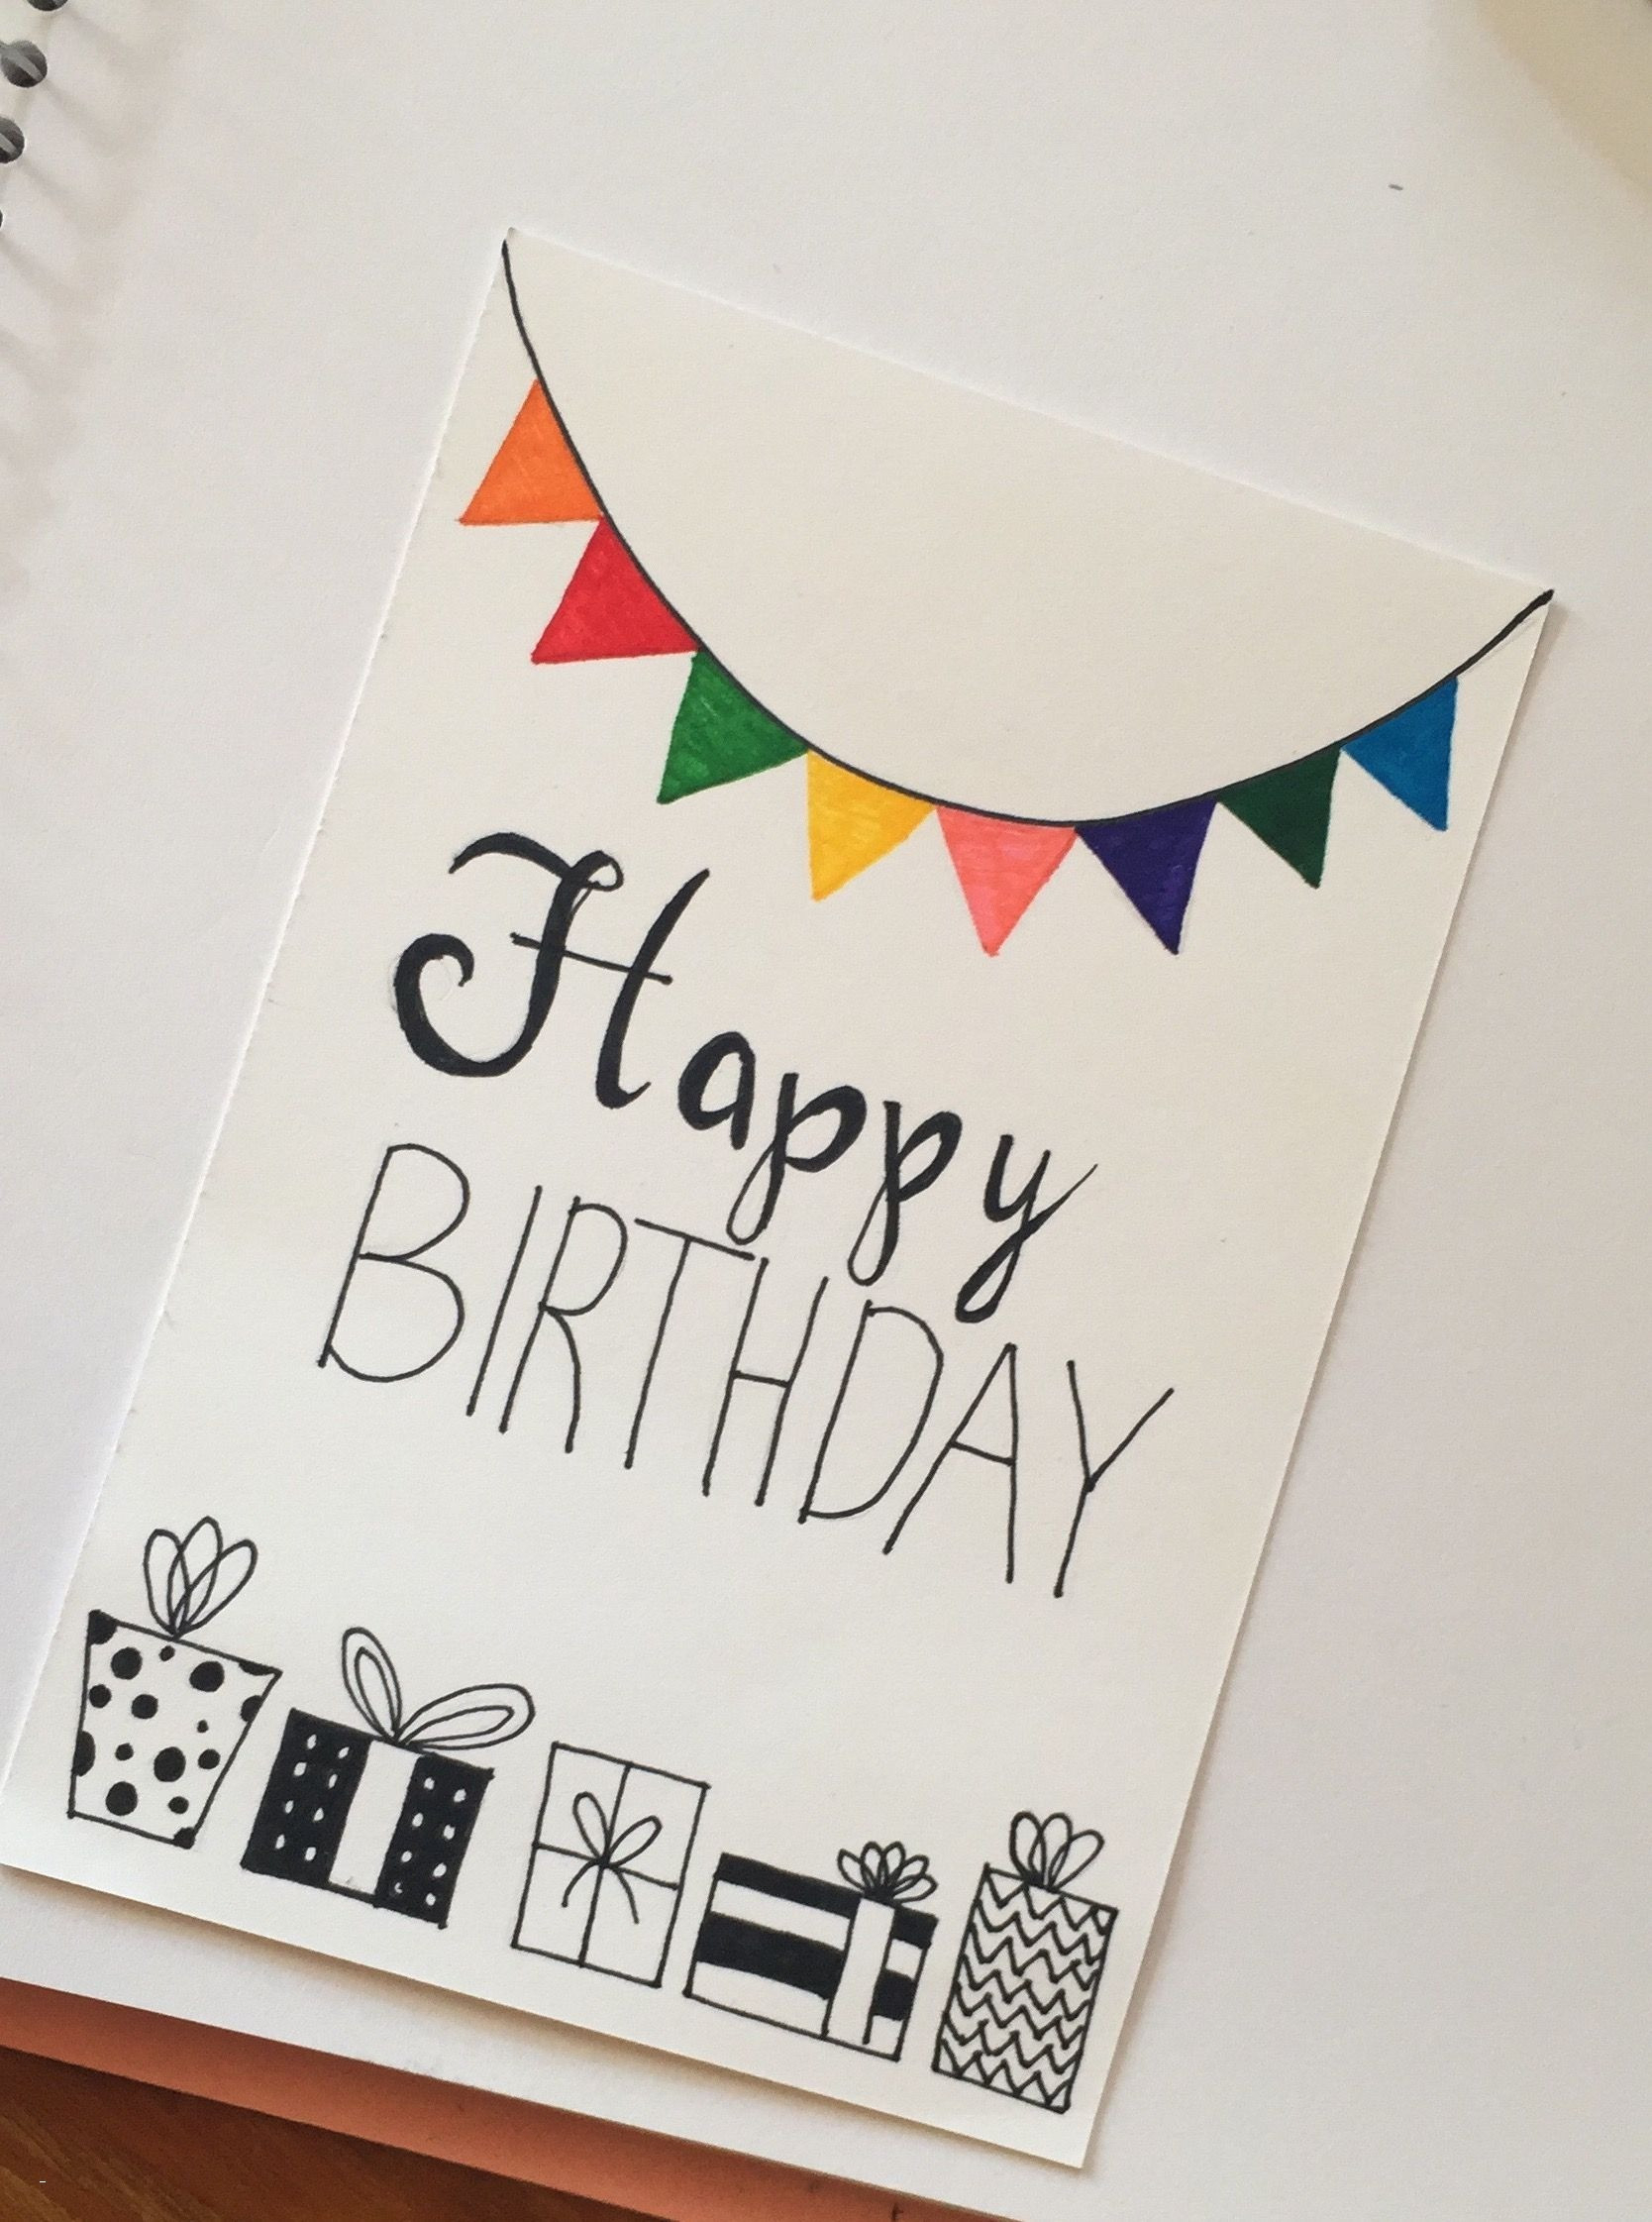 Dad Birthday Card Ideas Easy Dad Birthday Card Ideas For From Child Wording Text Quotes A S